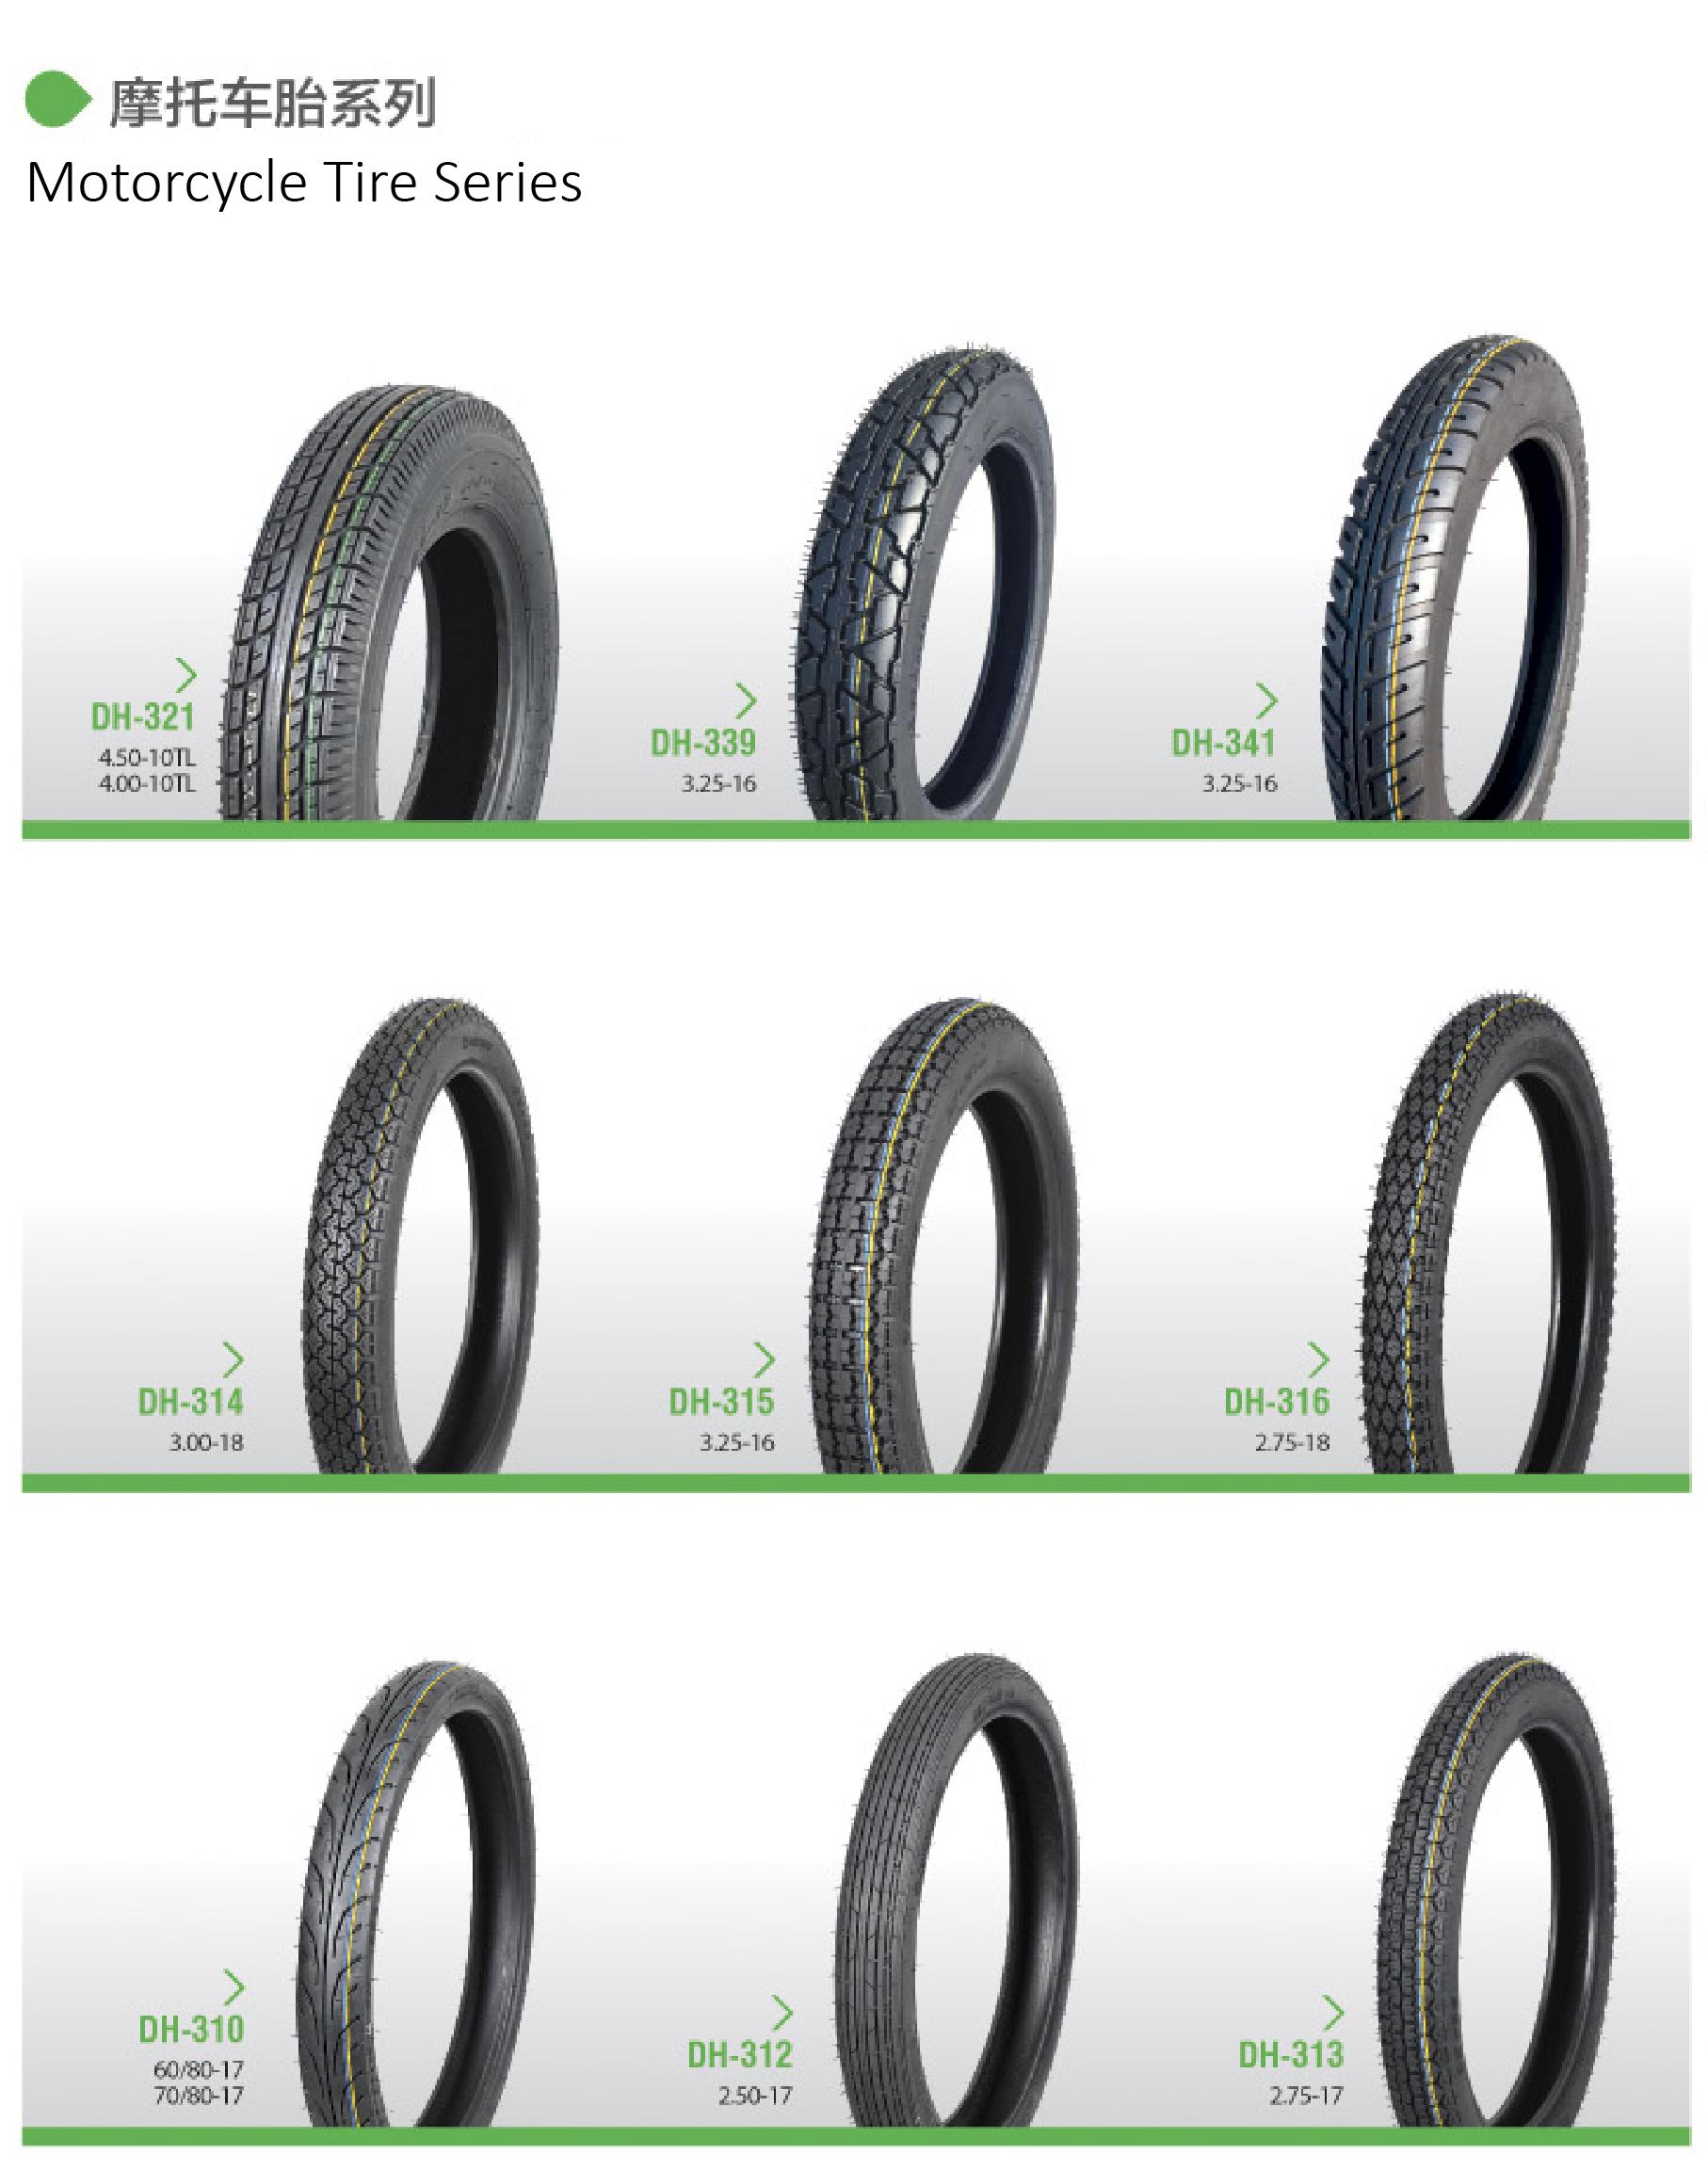 Duhow Motorcycle Tires image